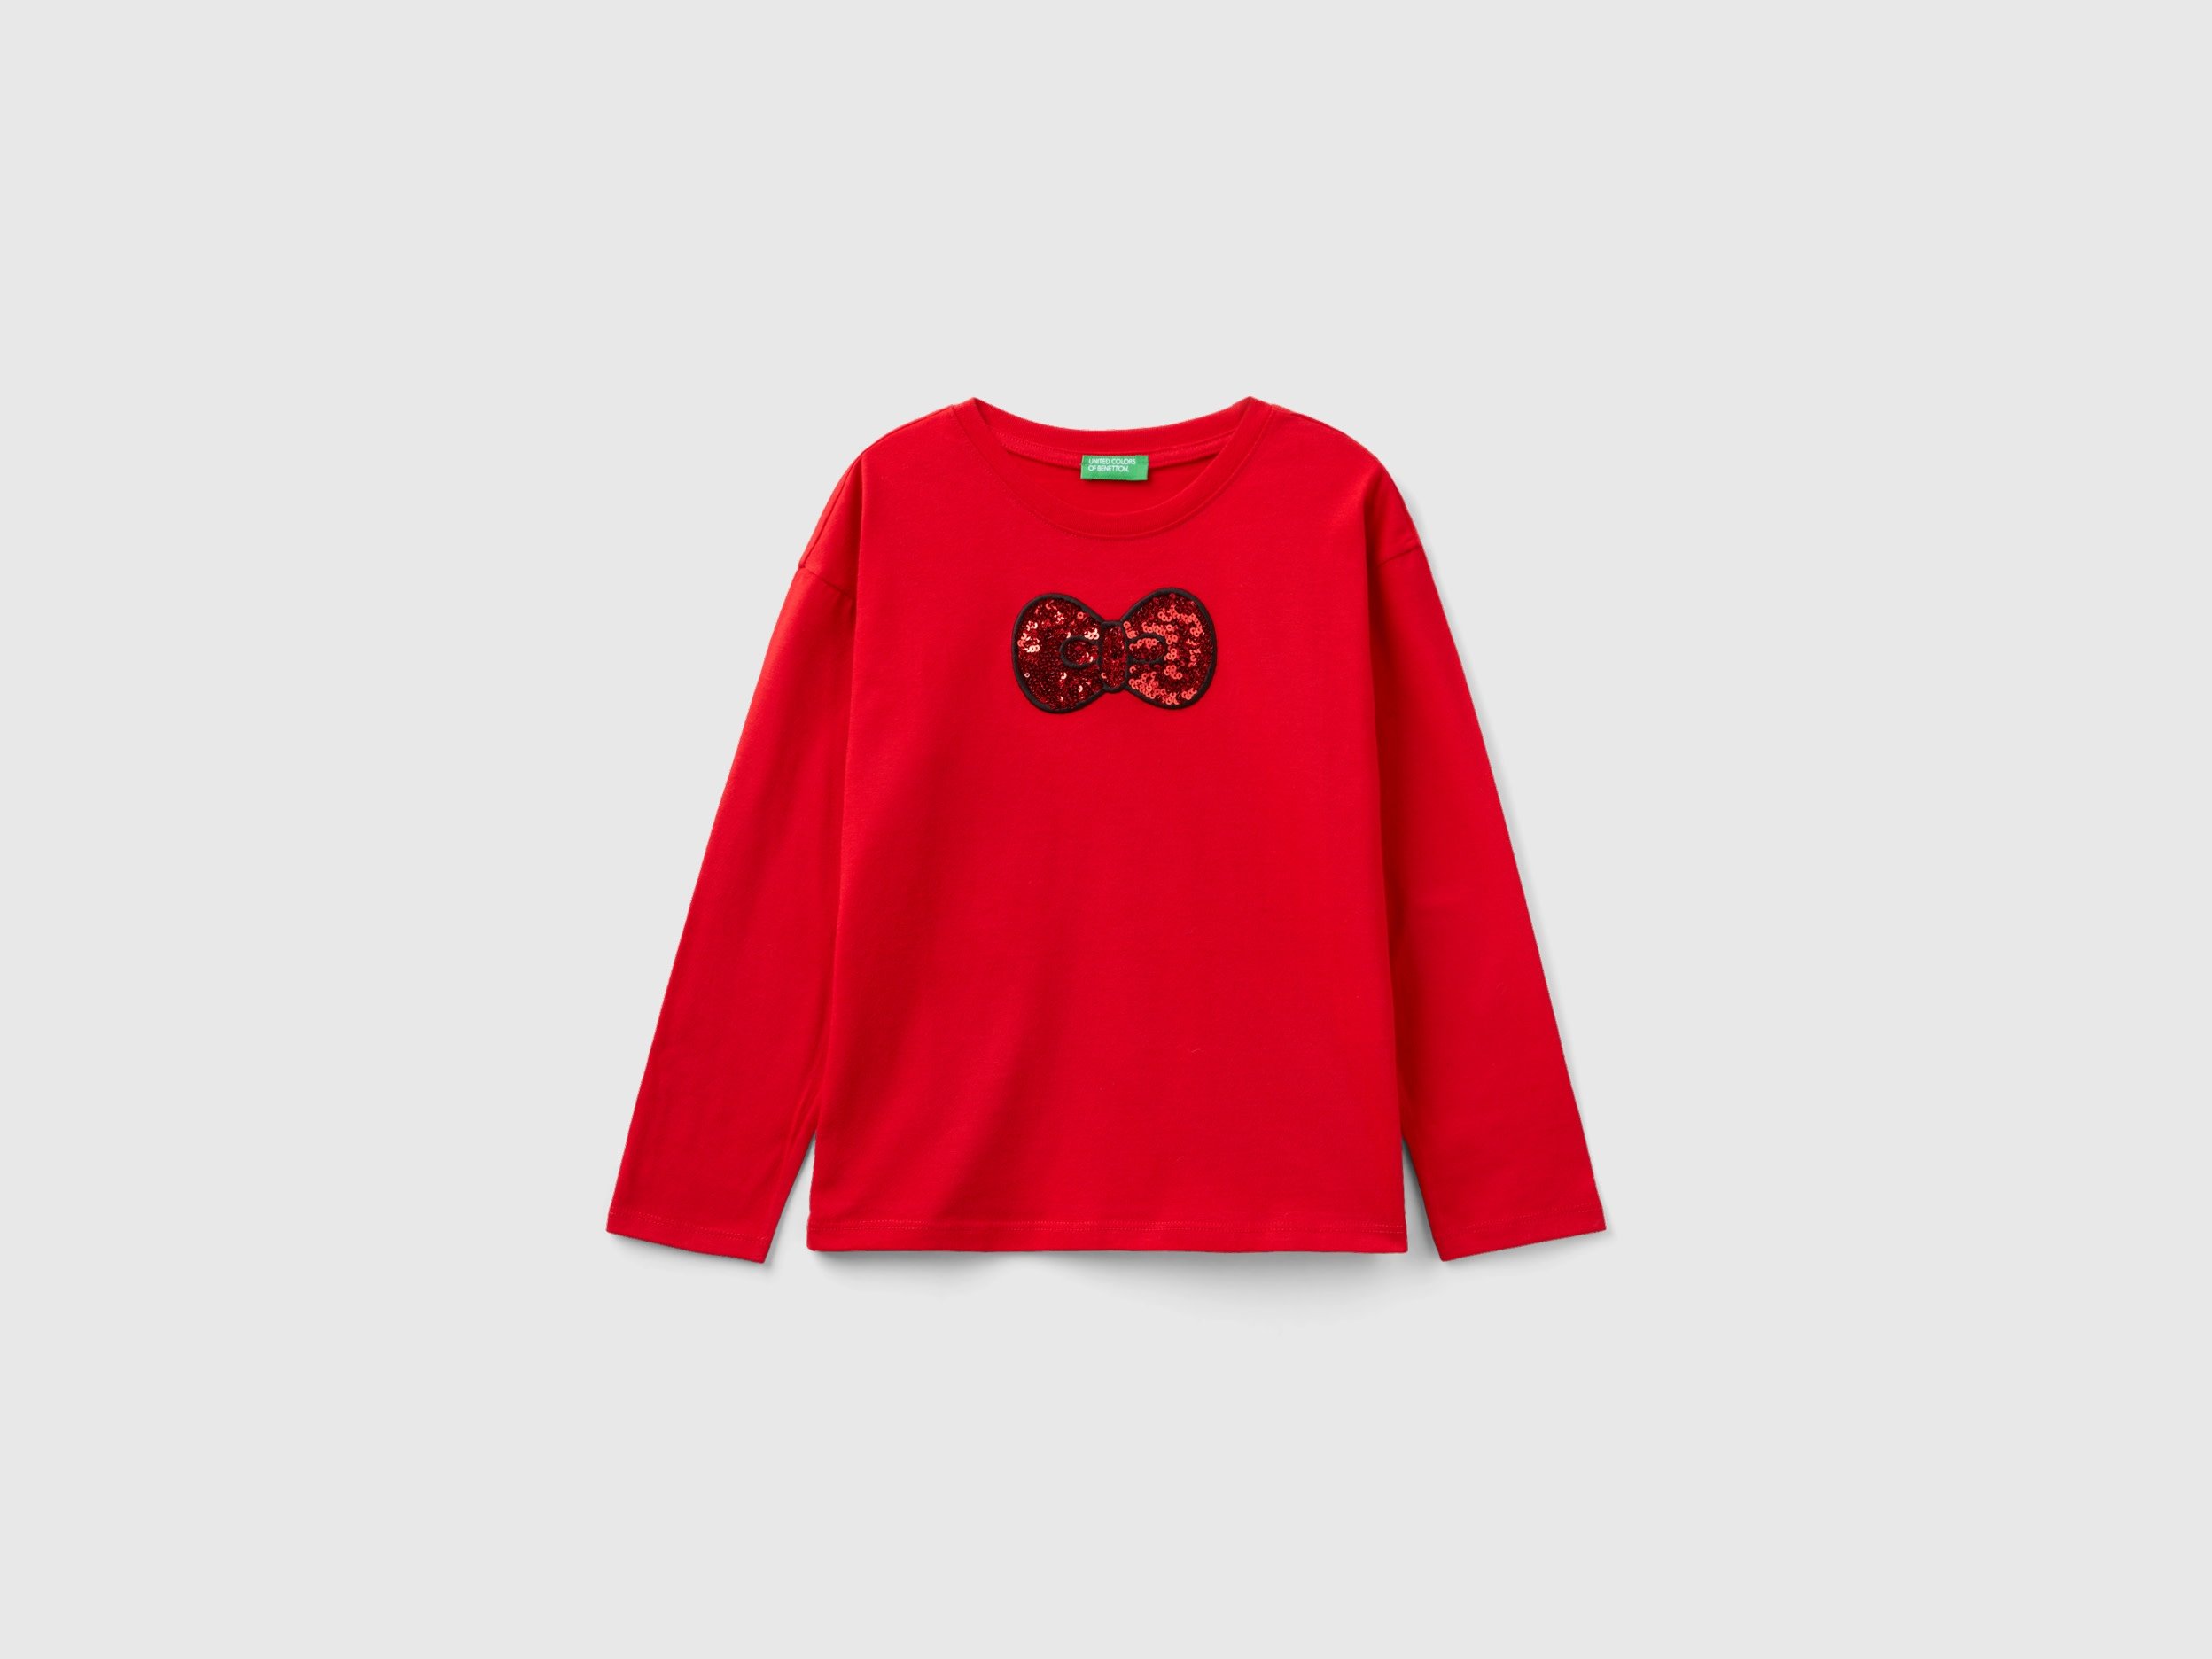 Benetton, Warm Cotton T-shirt With Sequins, size 3XL, Red, Kids